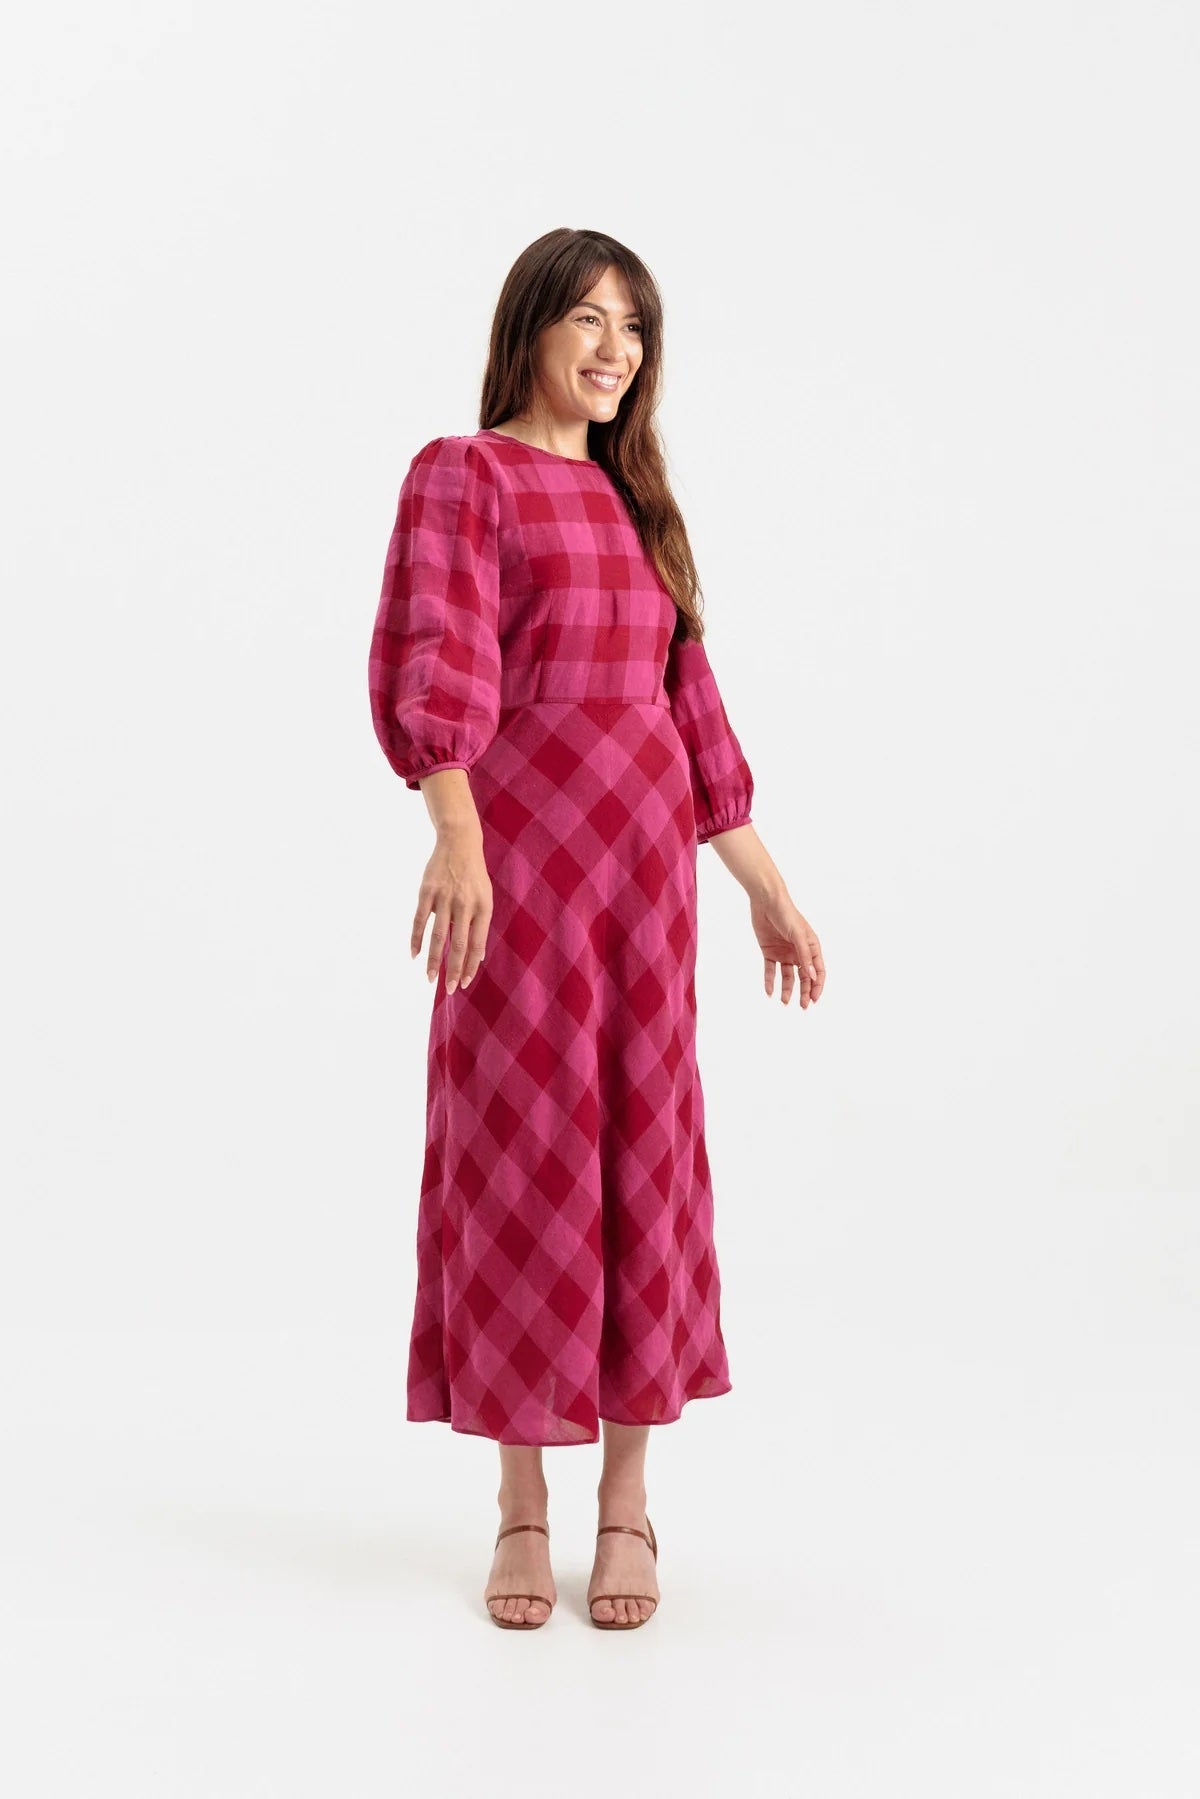 Woman wearing the Lulee Dress sewing pattern from Papercut Patterns on The Fold Line. A dress pattern made in cotton, linen, silk, or rayon fabric, featuring a round neck, darted bodice, long gathered sleeve, and hip skimming bias cut skirt. 